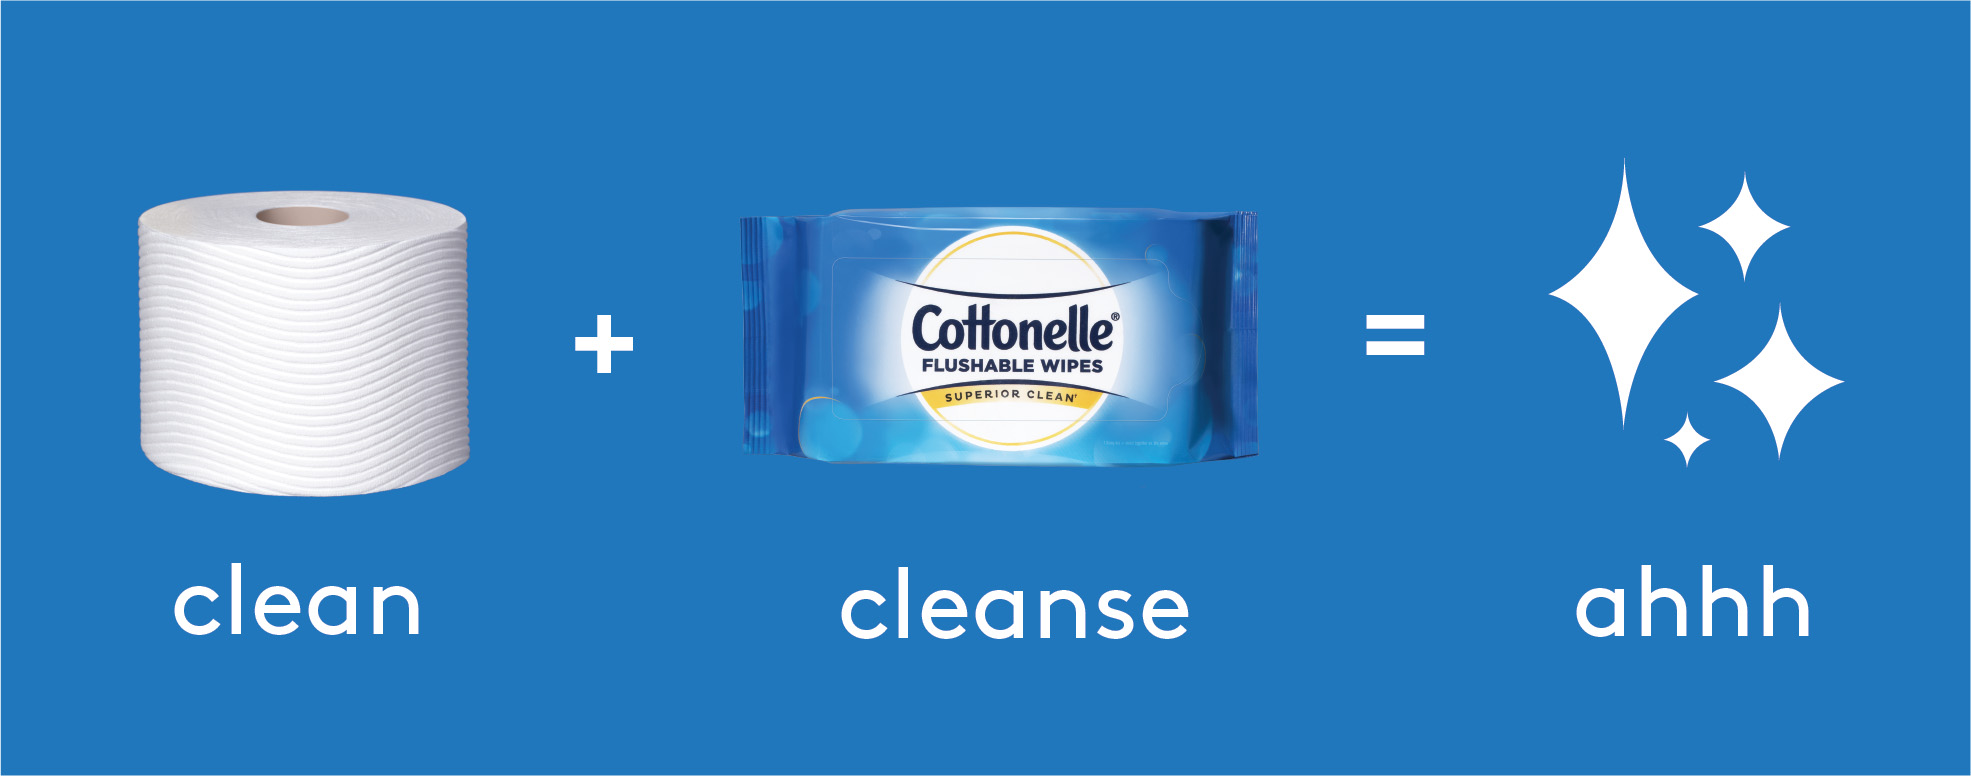 Pair Cottonelle ® Toilet Paper and Flushable Wipes for a Superior Clean, versus dry alone.